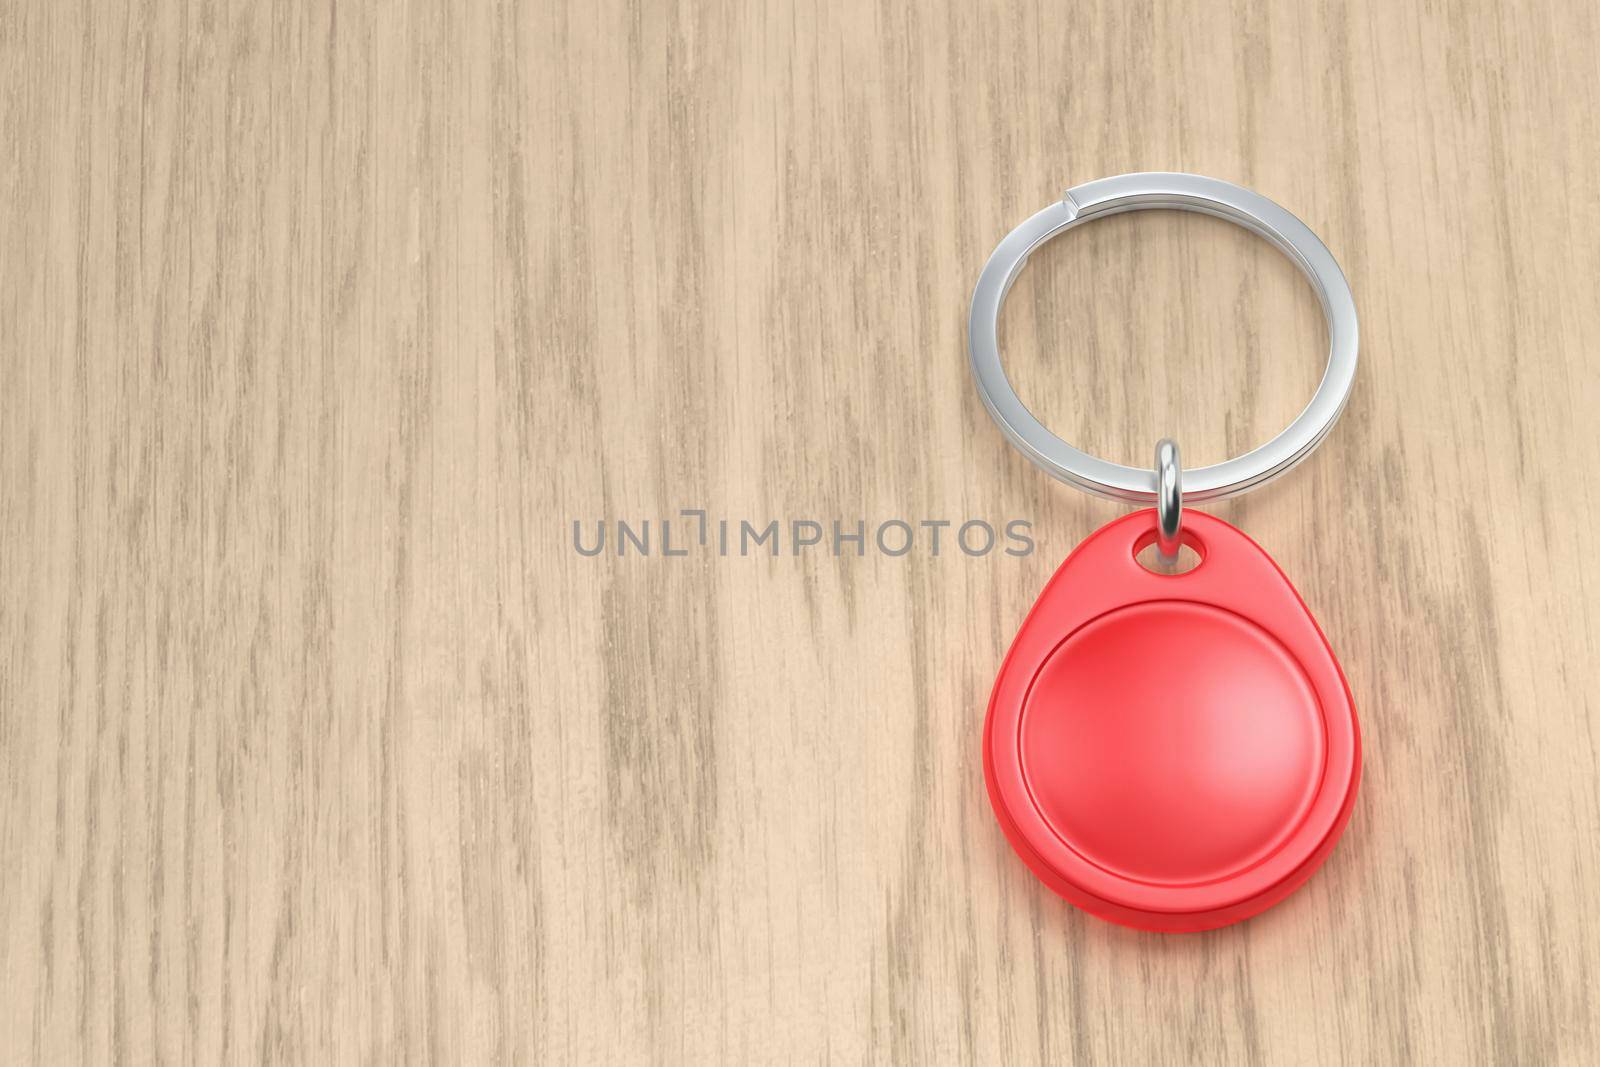 Red NFC key fob on the wooden desk